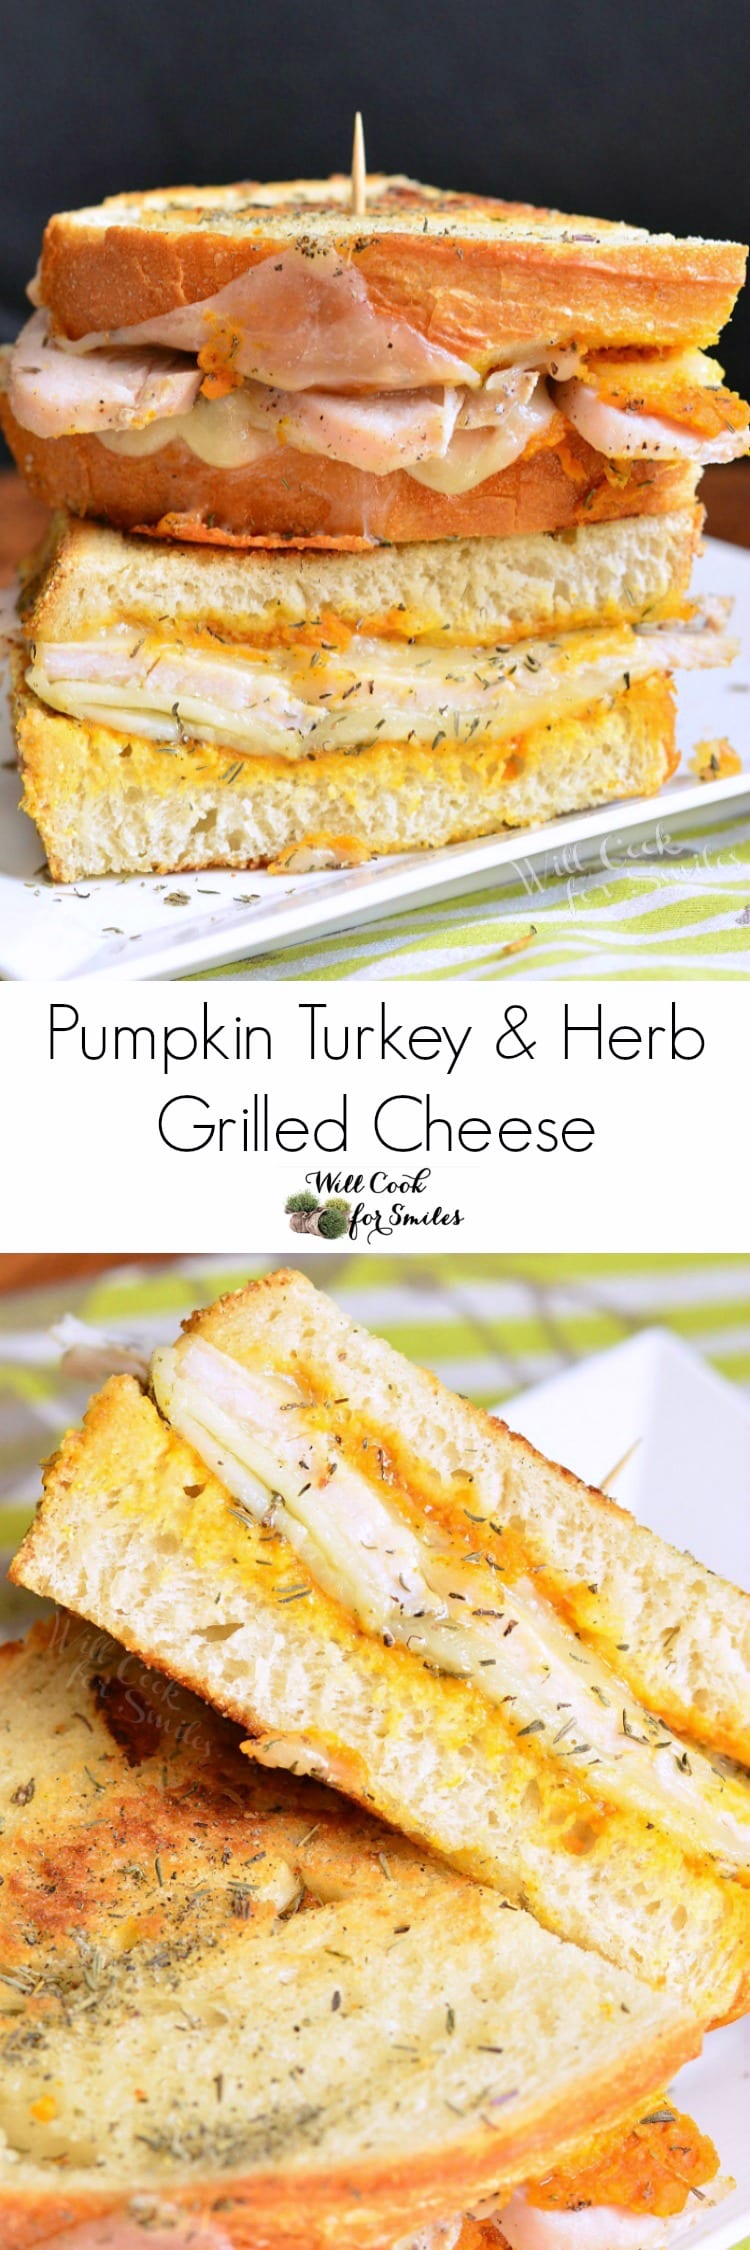 Pumpkin Turkey Grilled Cheese on a white plate photo collage 